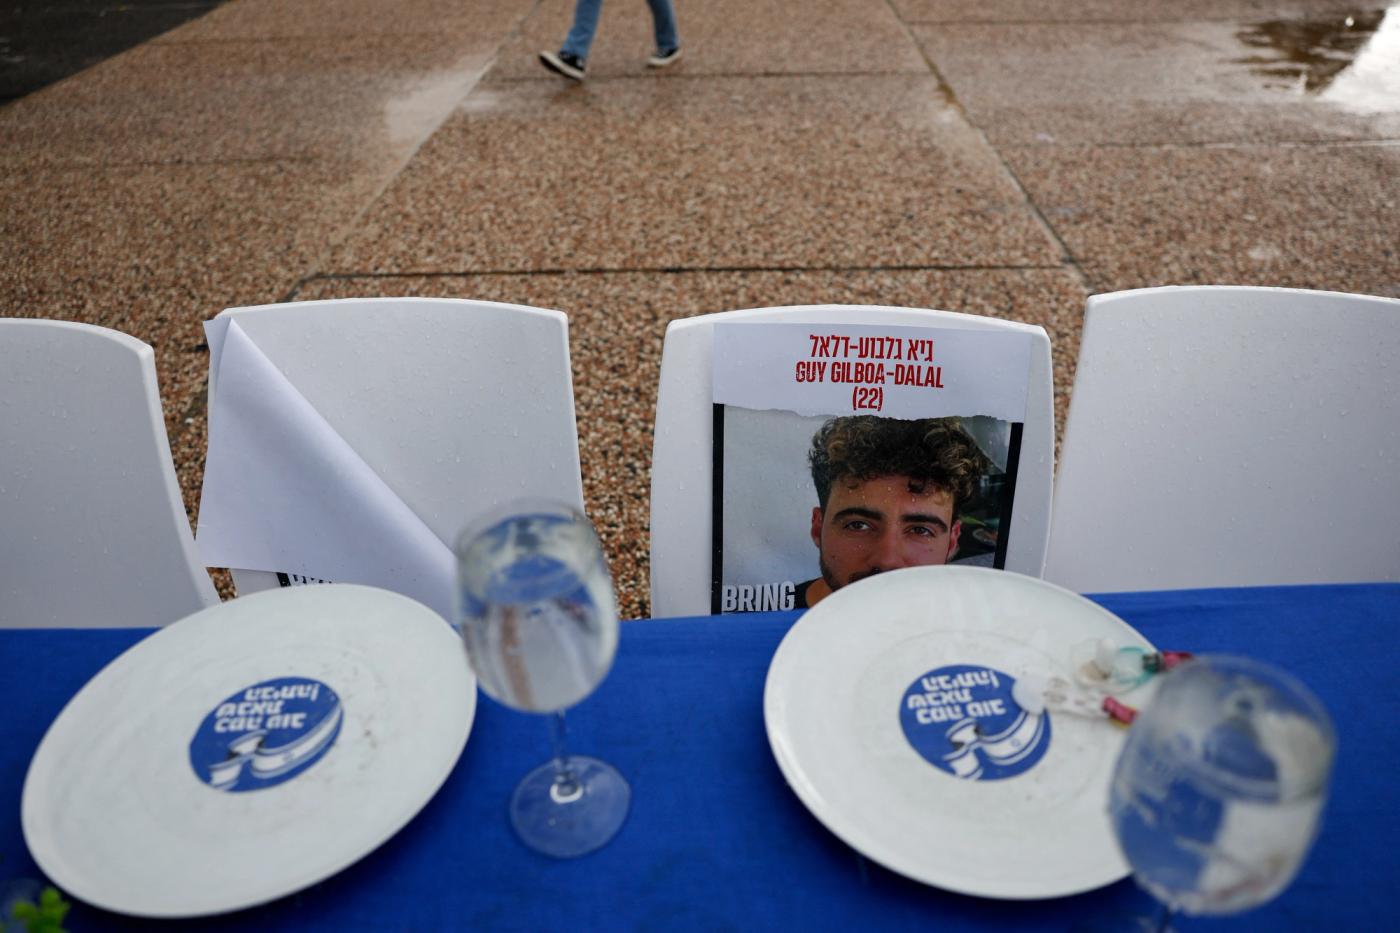 A photo of a hostage is displayed on a chair at a dinner table with mostly empty chairs representing Israeli hostages, amid the ongoing conflict between Israel and the Palestinian Islamist group Hamas, in Tel Aviv